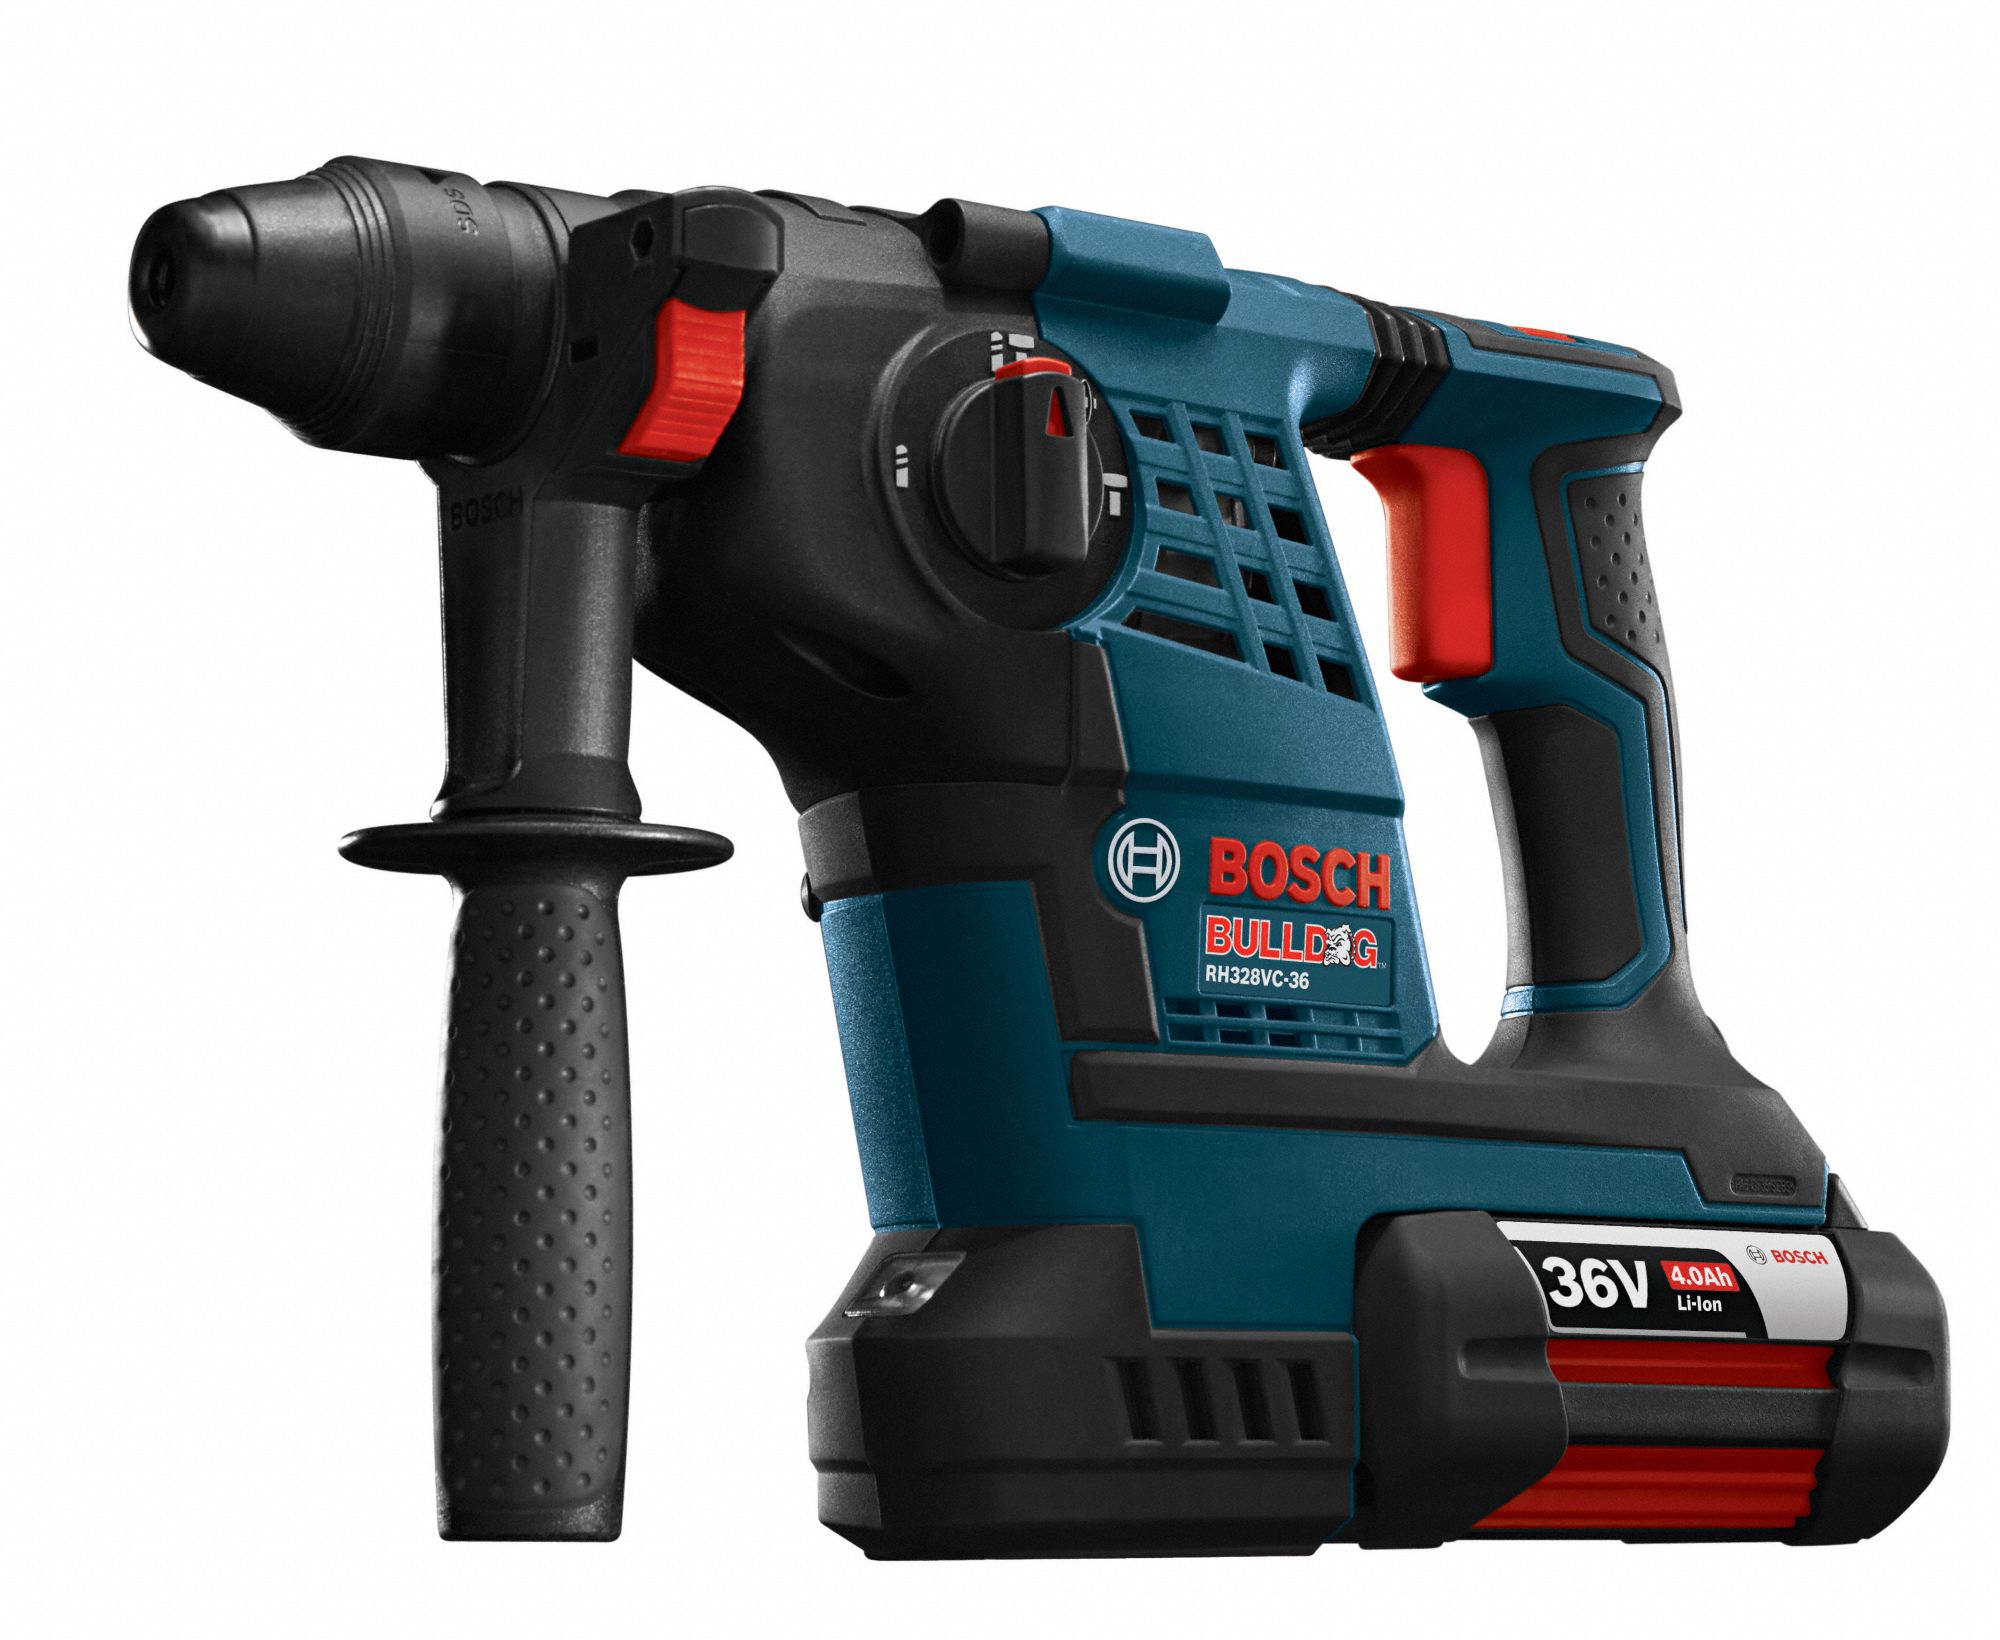 BOSCH Cordless Rotary Hammer, 36.0 V Voltage, 0 to 4100 Blows per ...